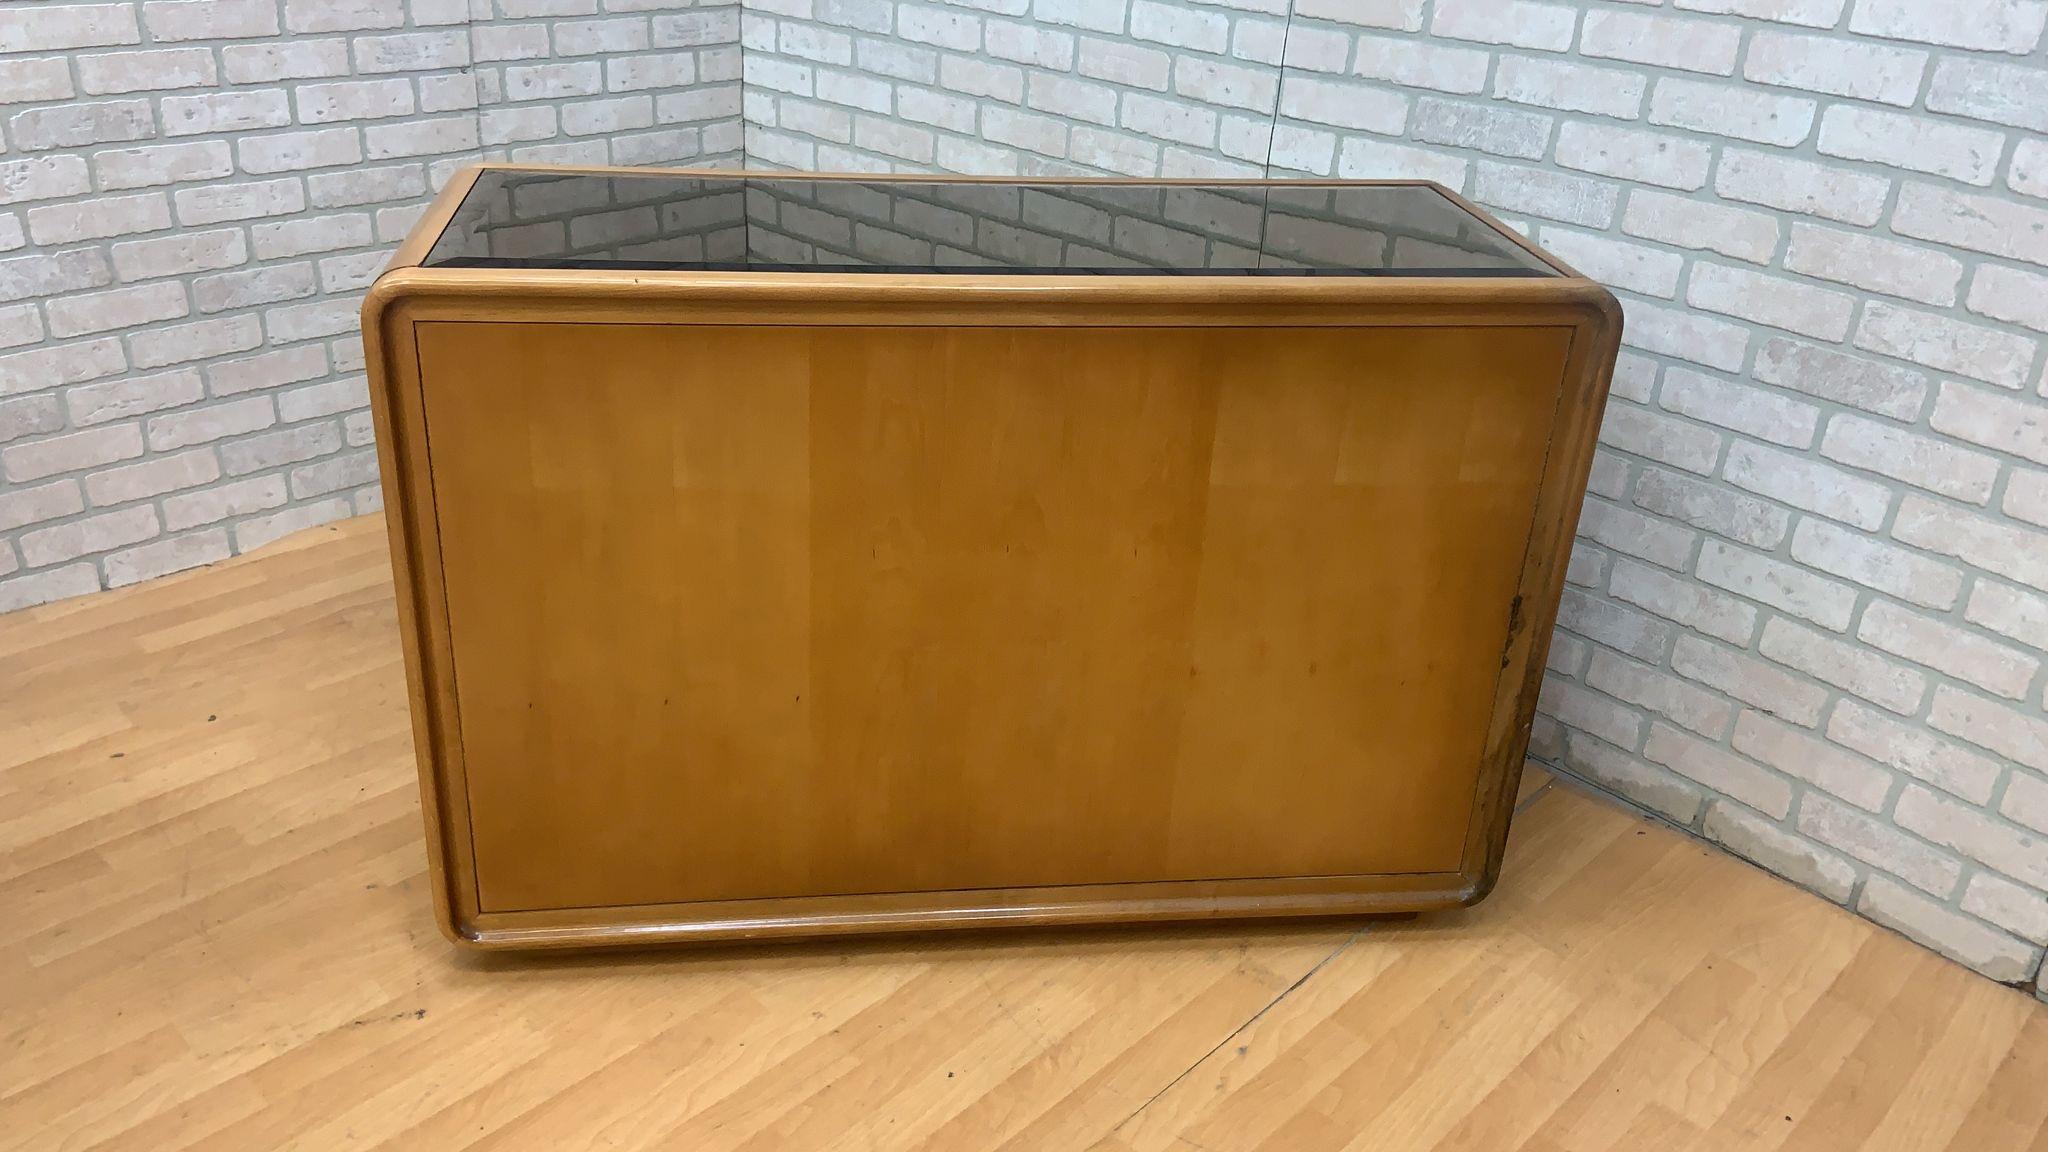 Art Deco American of Martinsville Burlwood serving cabinet

Mirrored top olive wood burl bar serving cabinet from American of Martinsville. It has 2 side cabinets with beautiful burl doors and shelving. The middle cabinet has a mirrored back and